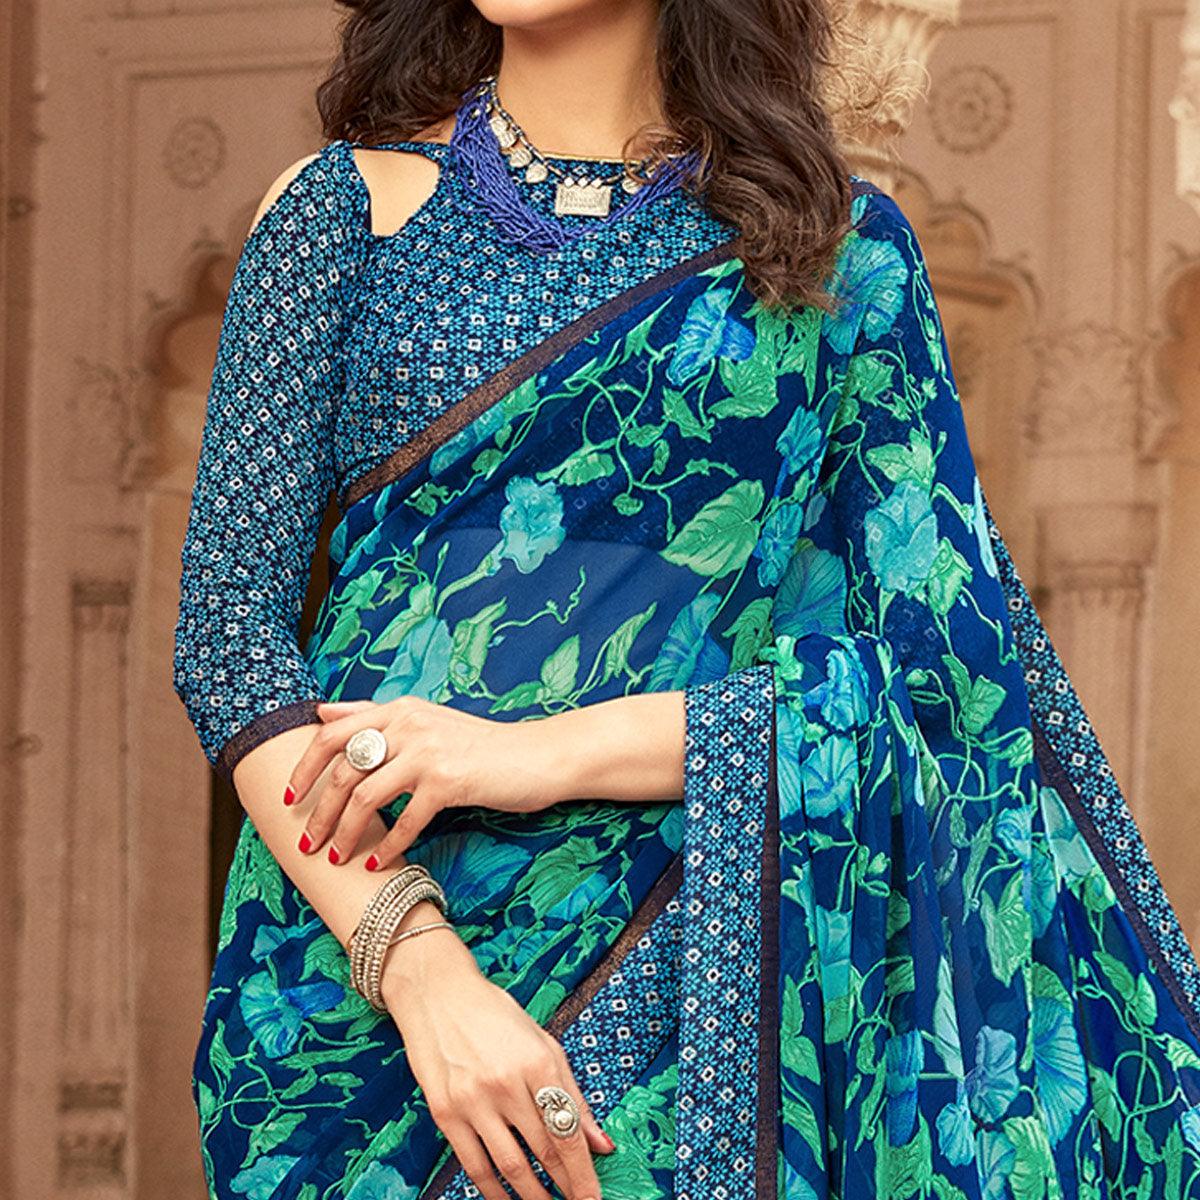 Prominent Blue Colored Casual Floral Printed Georgette Saree - Peachmode